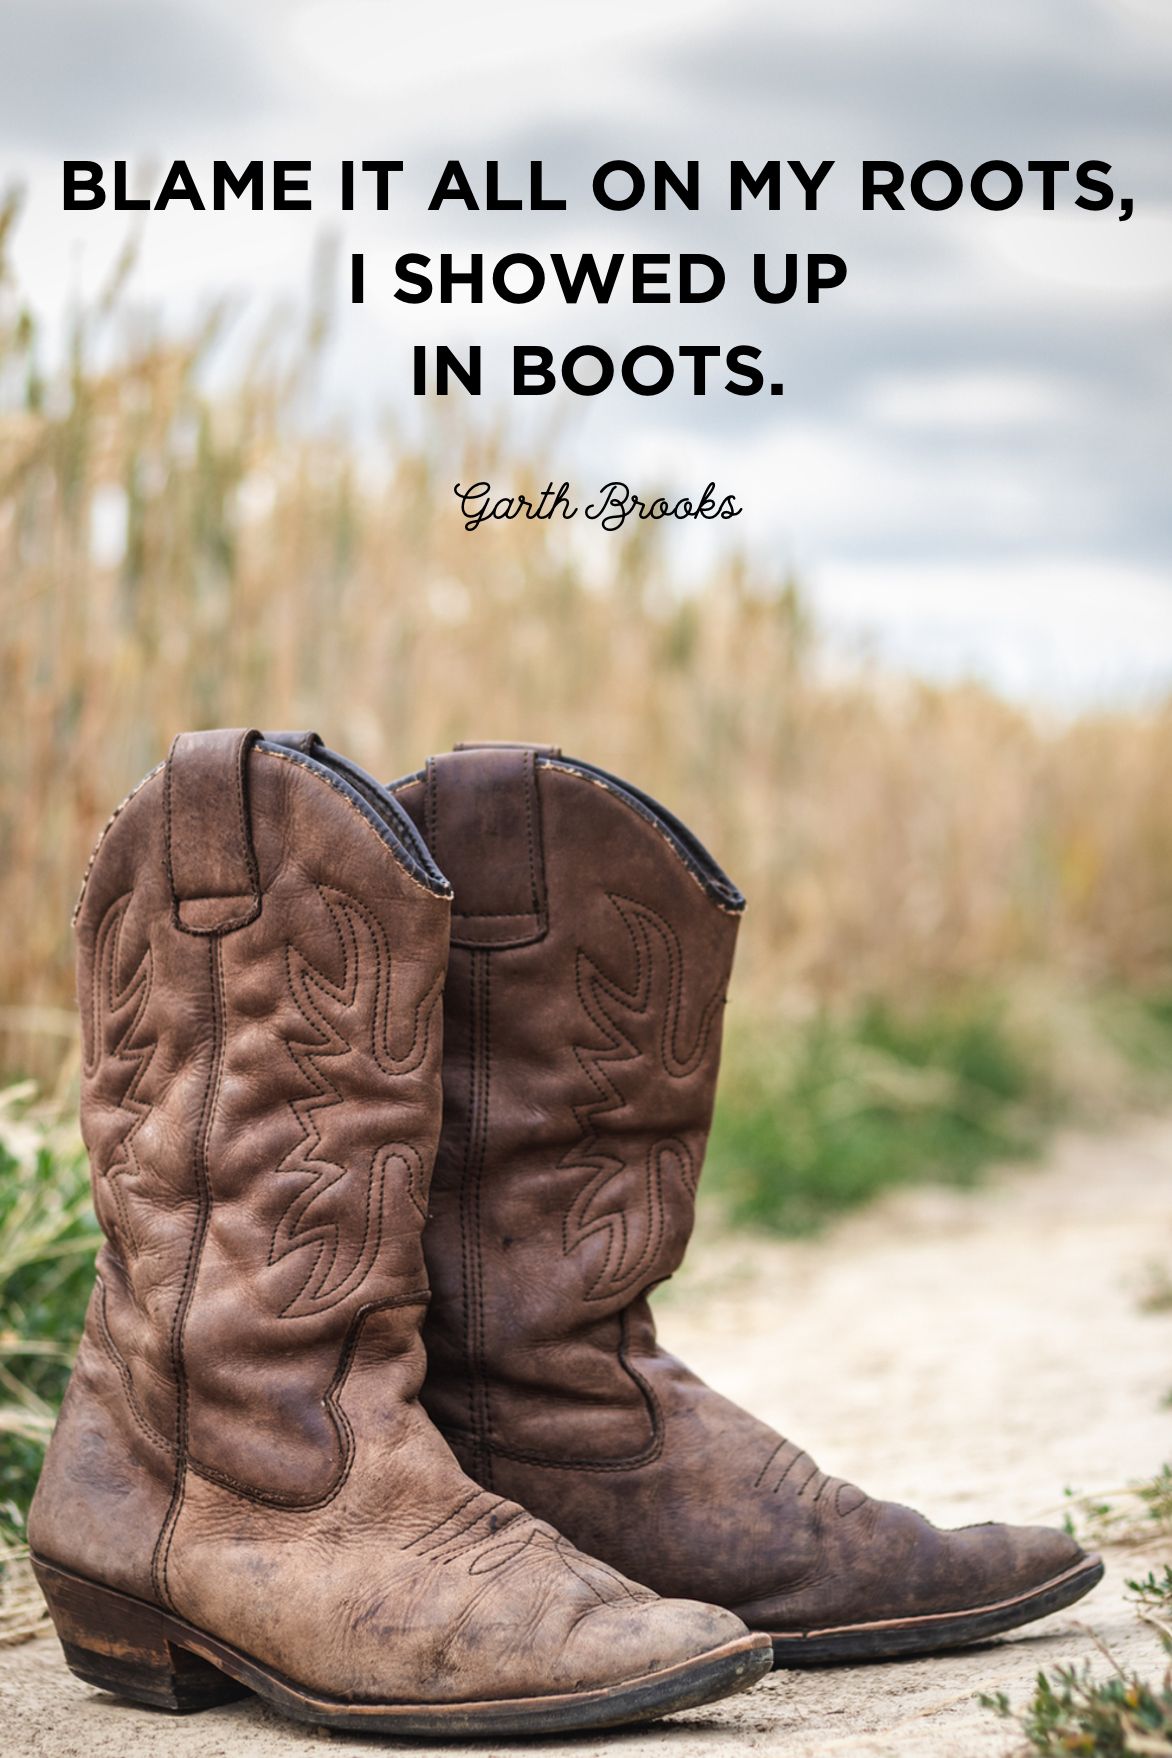 country quotes